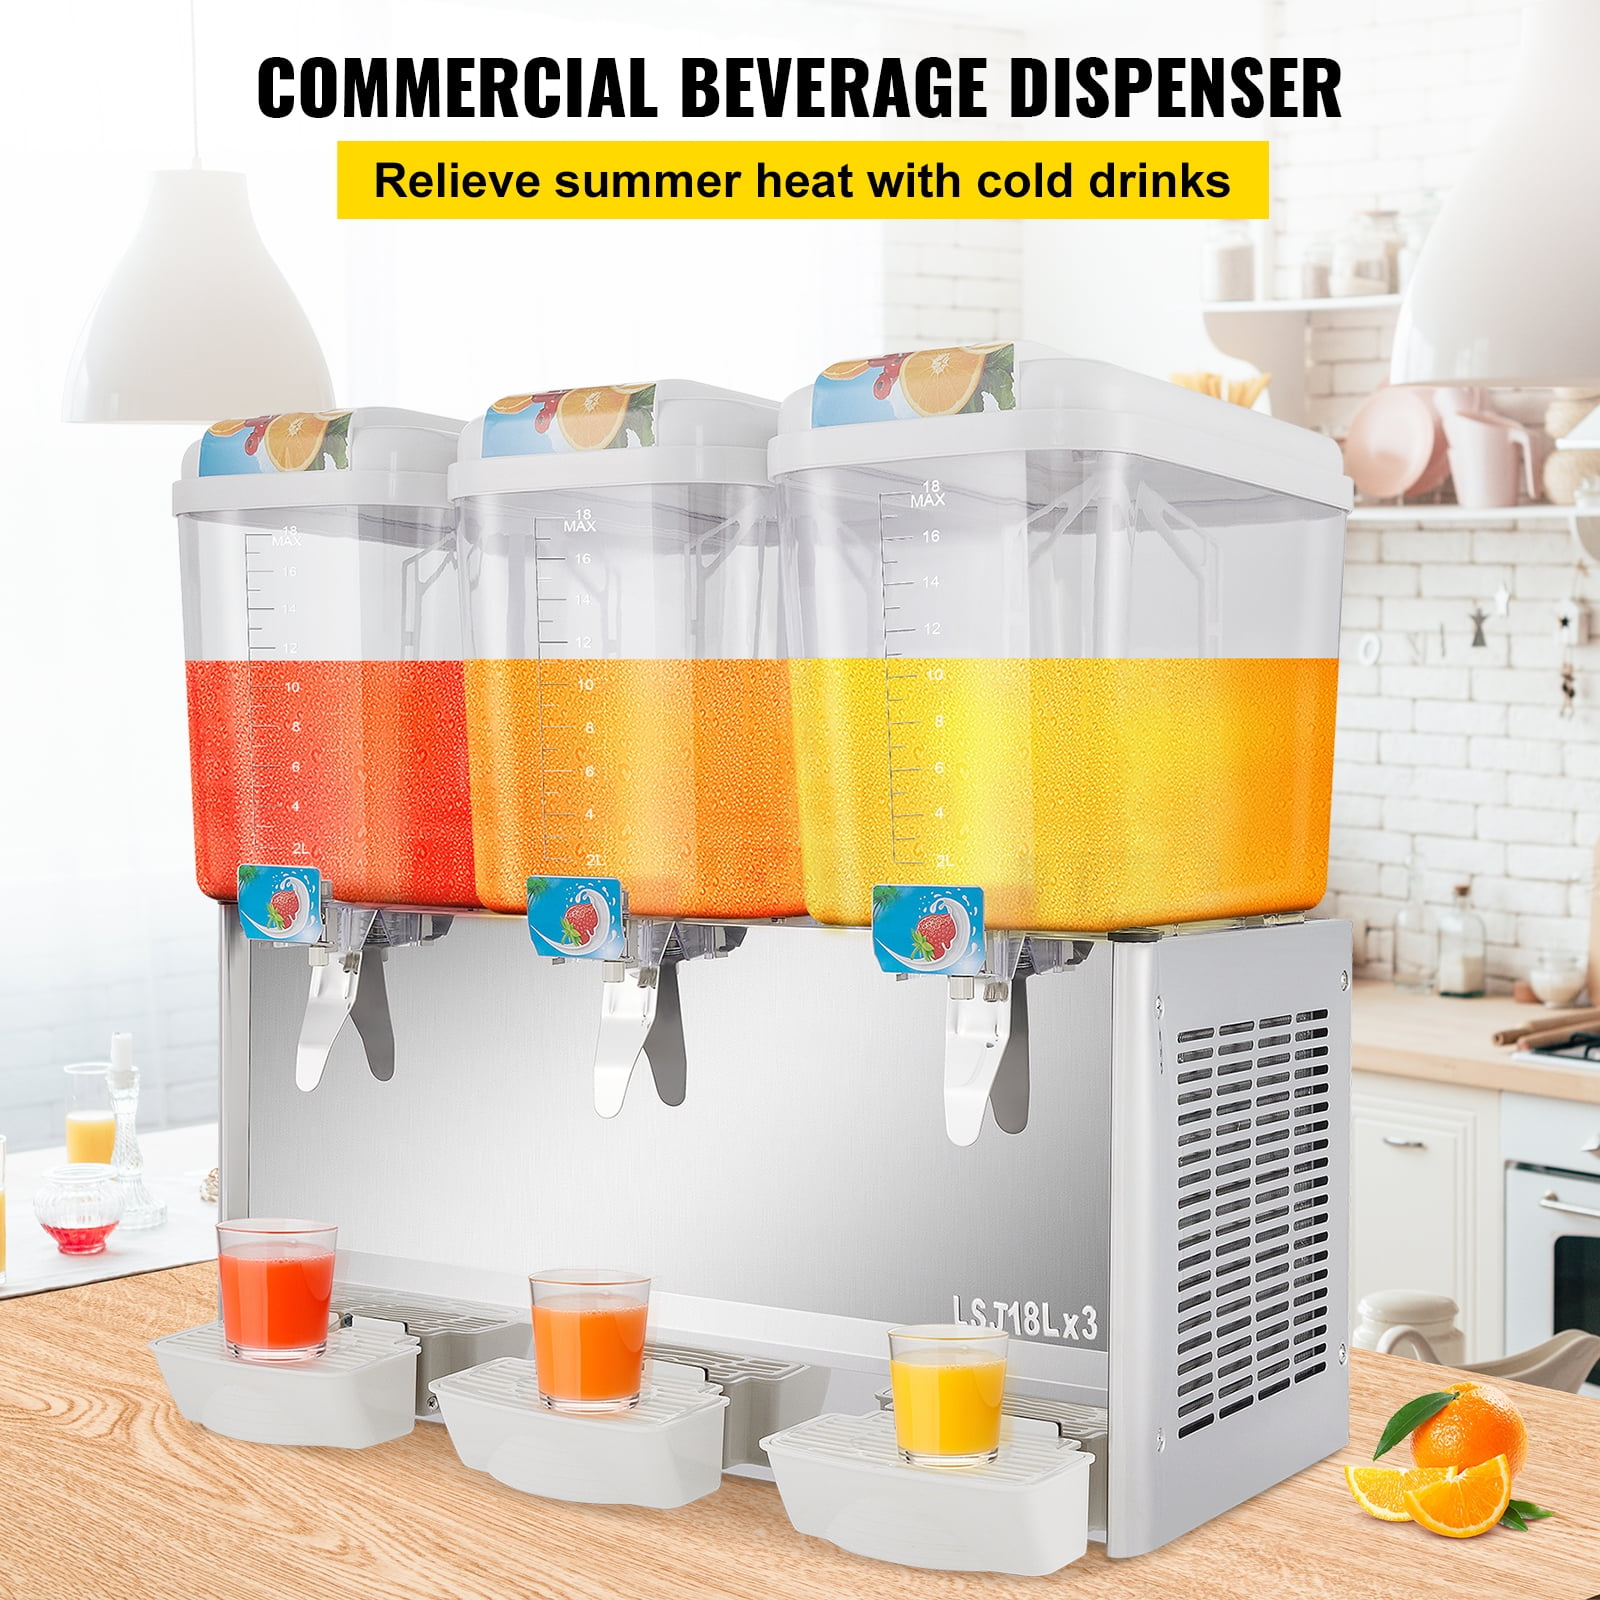 Bentism Commercial Beverage Dispenser, 20.4 qt 18L 3 Tanks Ice Tea Drink Machine, 680W 304 Stainless Steel Juice Dispenser with 41-53.6 Thermostat